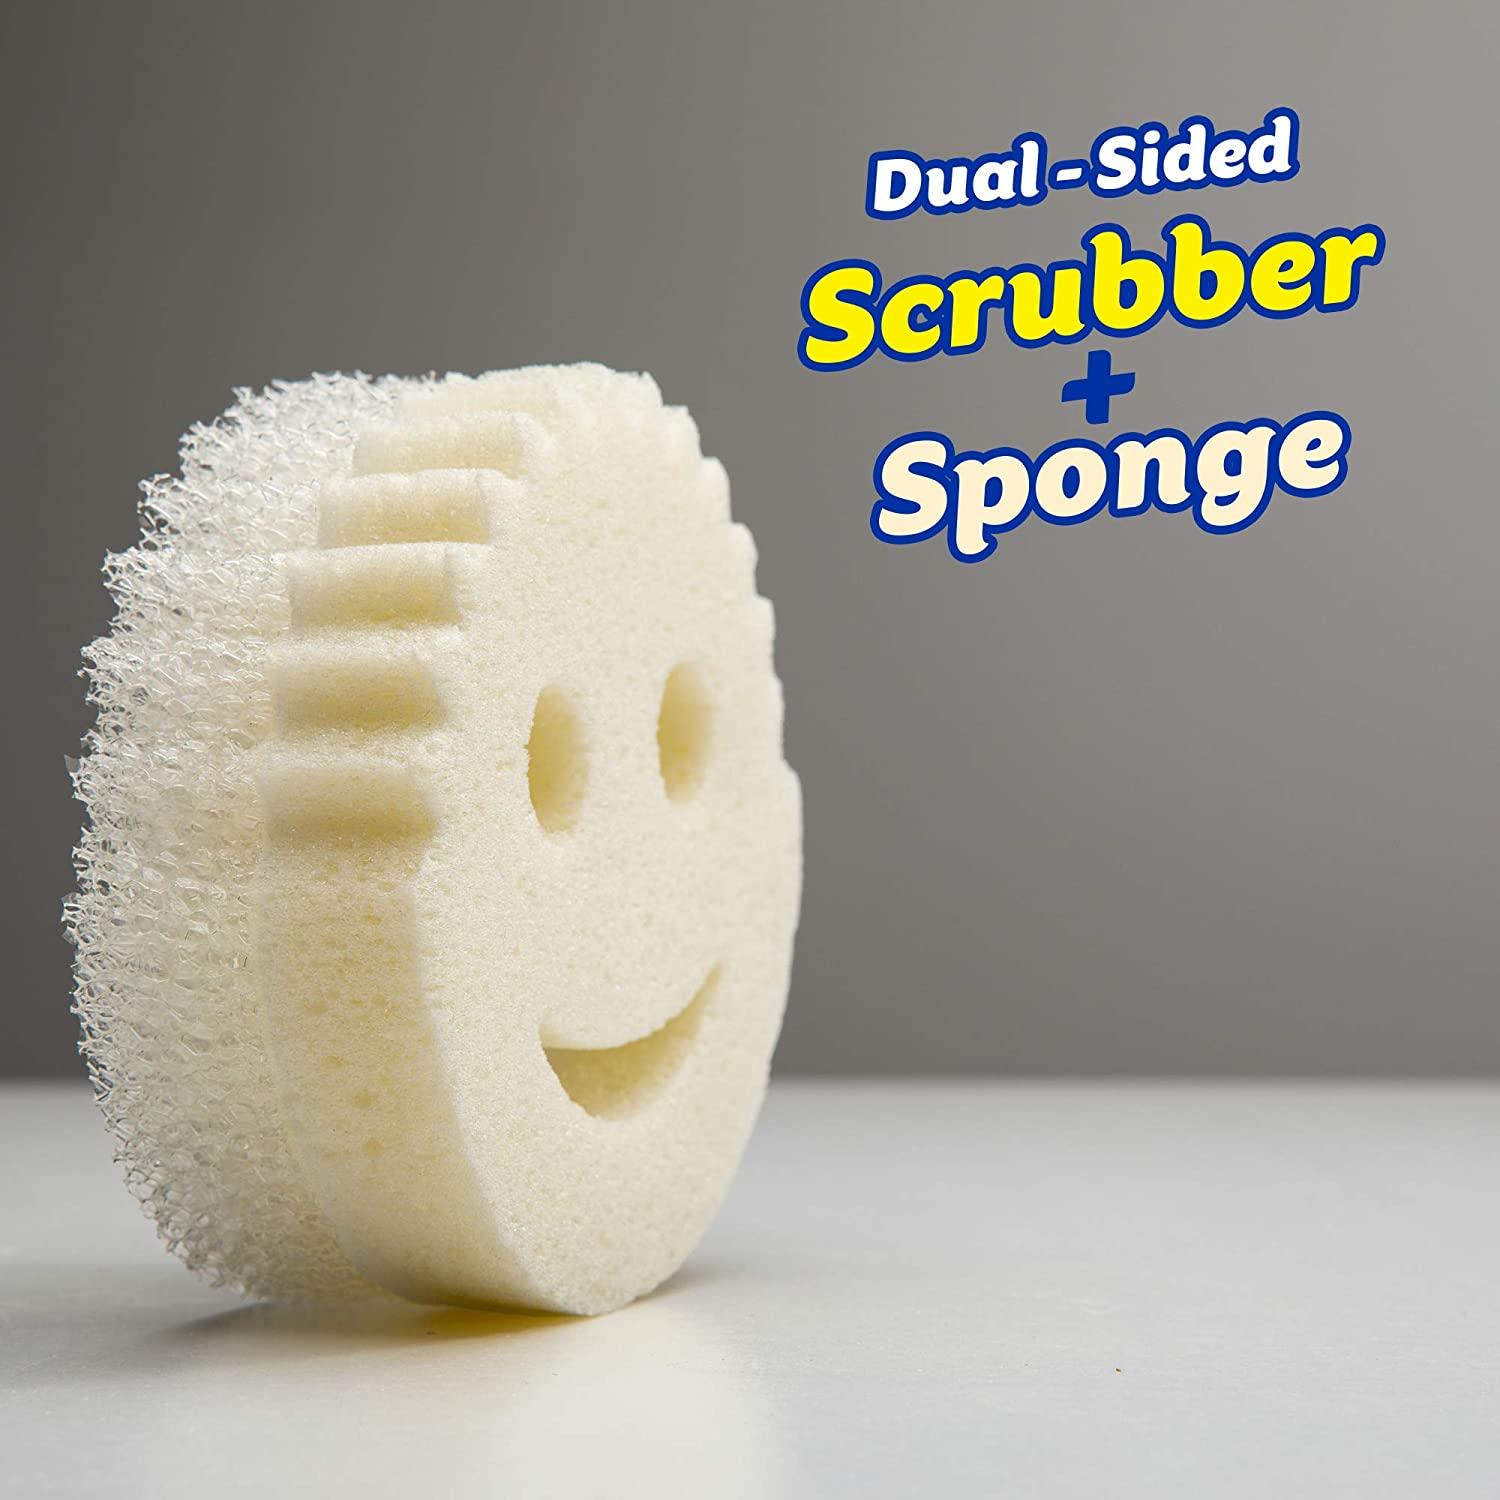 Scrub Daddy Dual-Sided Sponge and Scrubber- Scrub Mommy Dye Free - Scratch- Free Scrubber for Dishes and Home, Odor Resistant, Soft in Warm Water, Firm  in Cold, Deep Cleaning, Dishwasher Safe, 1ct 1